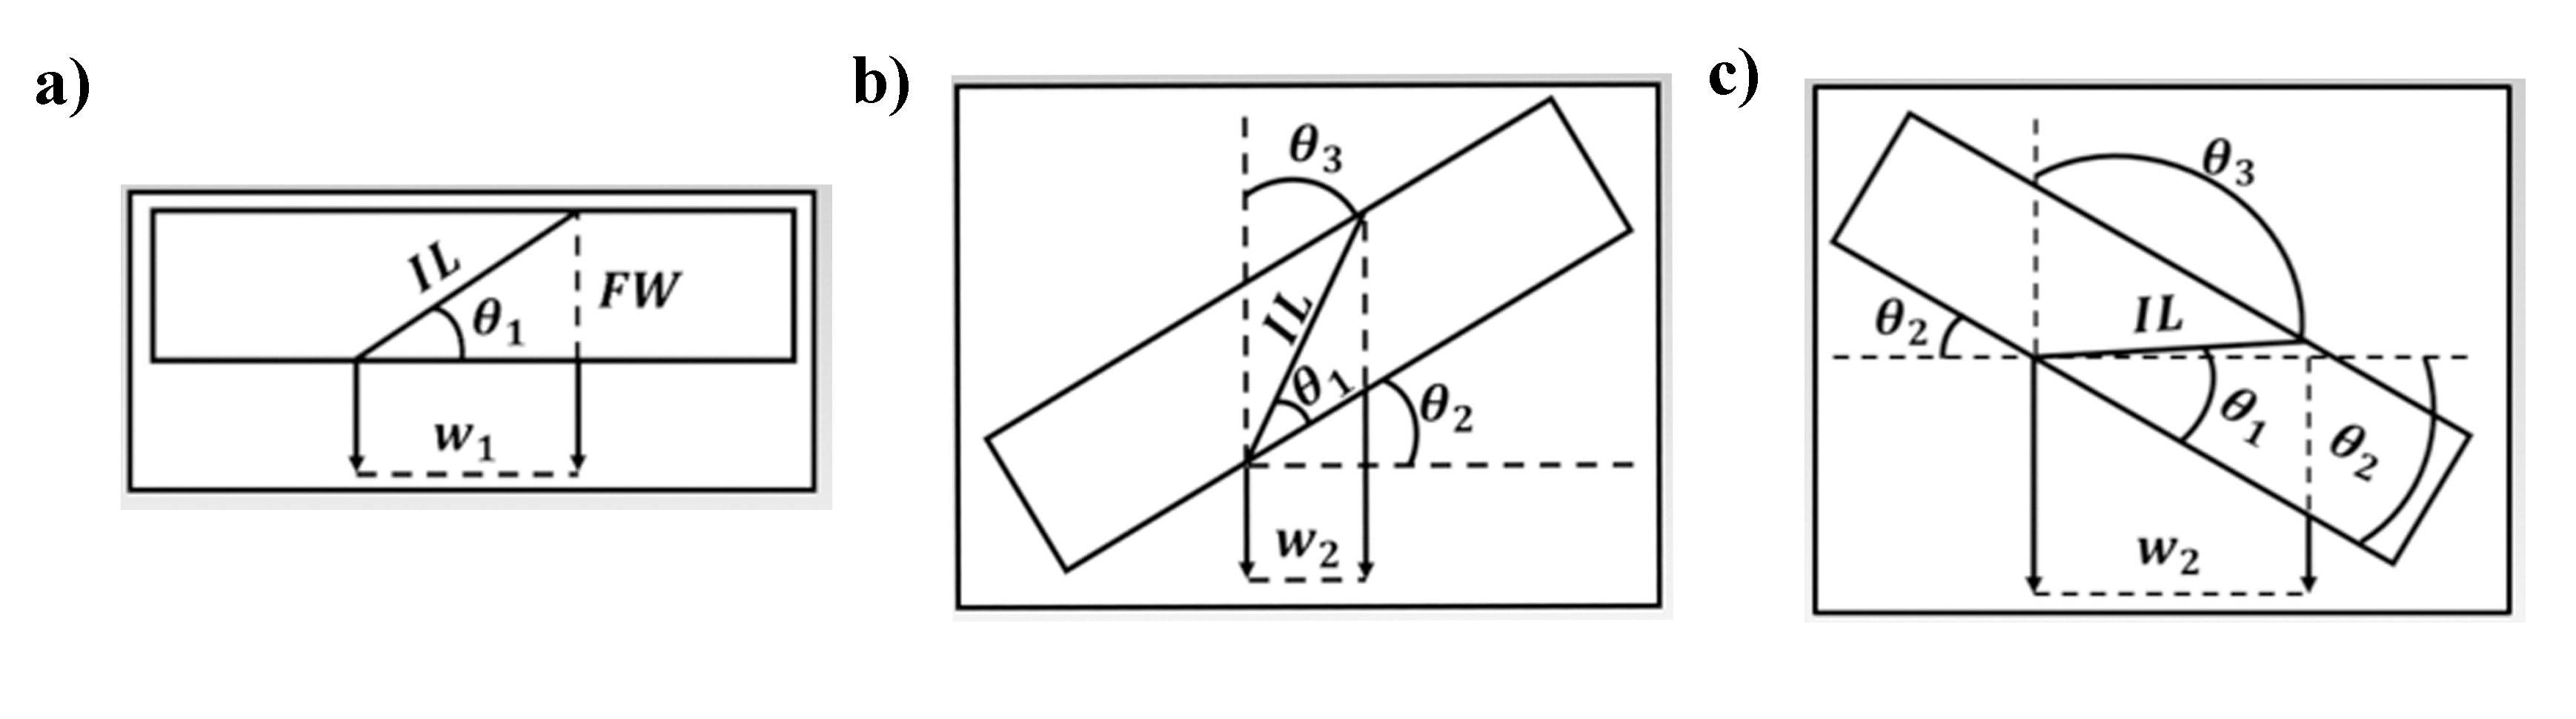 Schematics illustrating calculation of interface on edge
conditions and sample thickness. a) Sample in original tilt, b) sample
tilted negatively, and c) sample tilted positively.